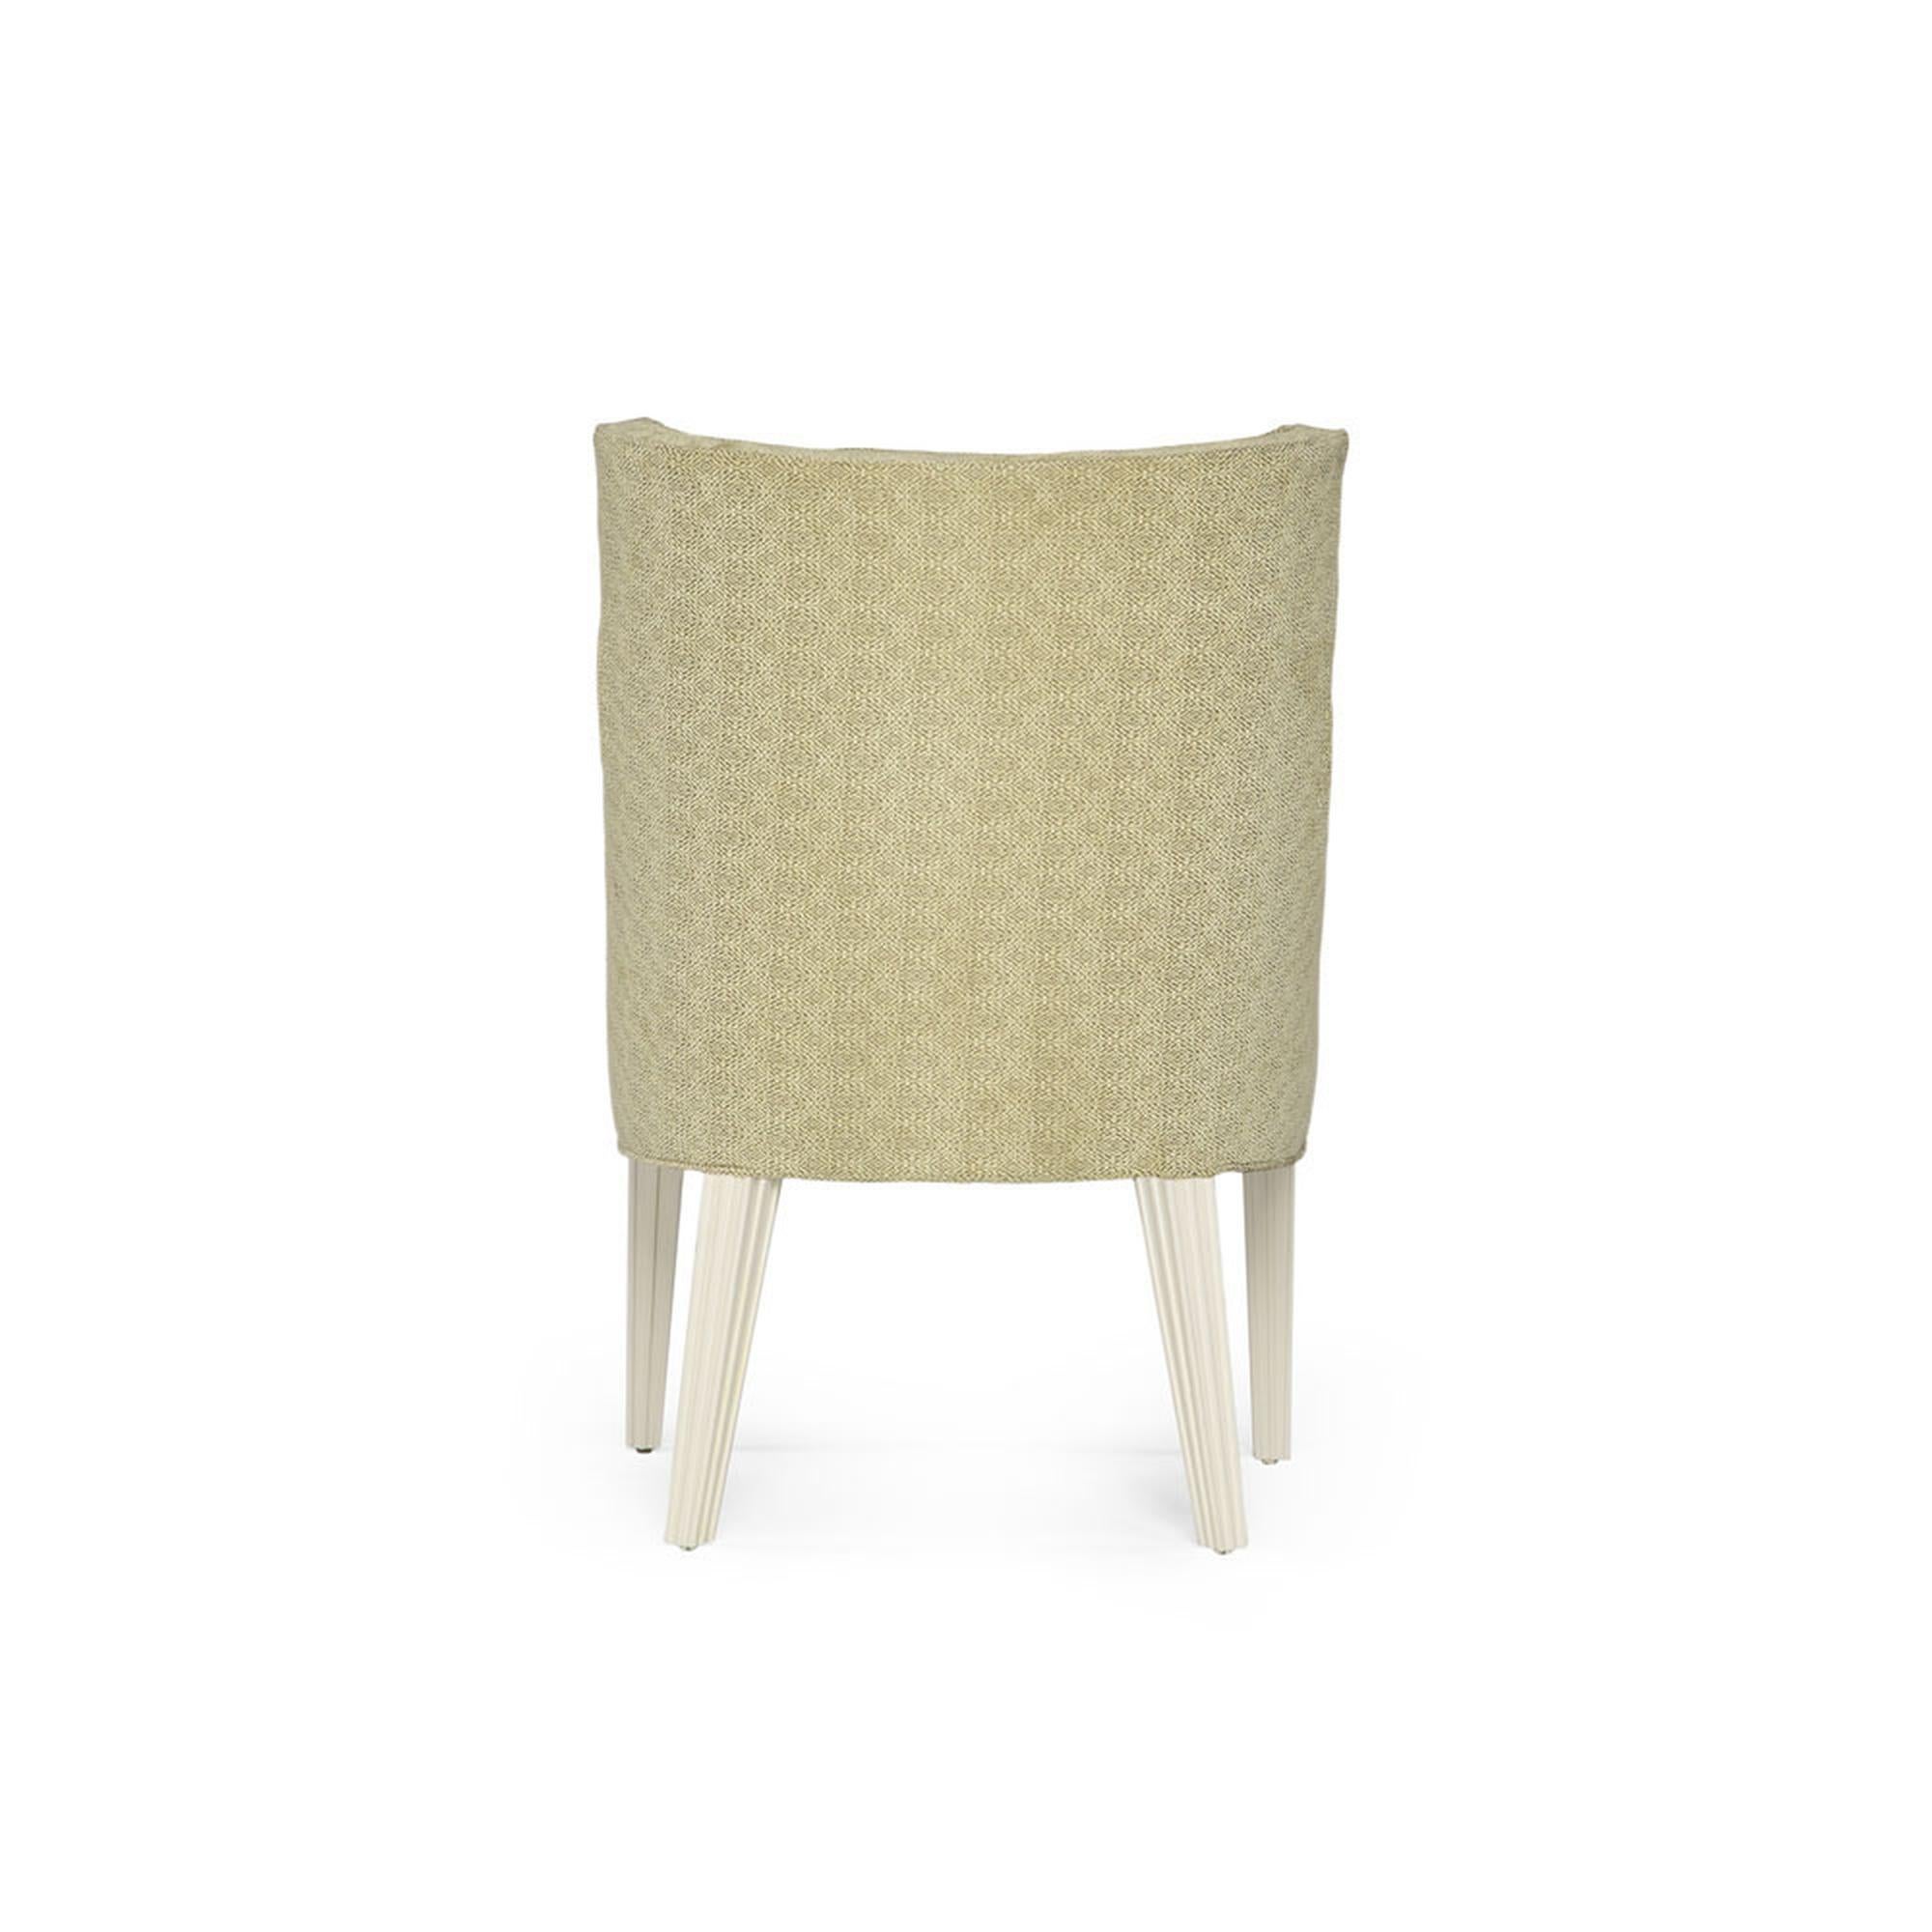 Modern Balboa Dining Chair in Beige with Lacquered White Legs by Innova Luxuxy Group For Sale